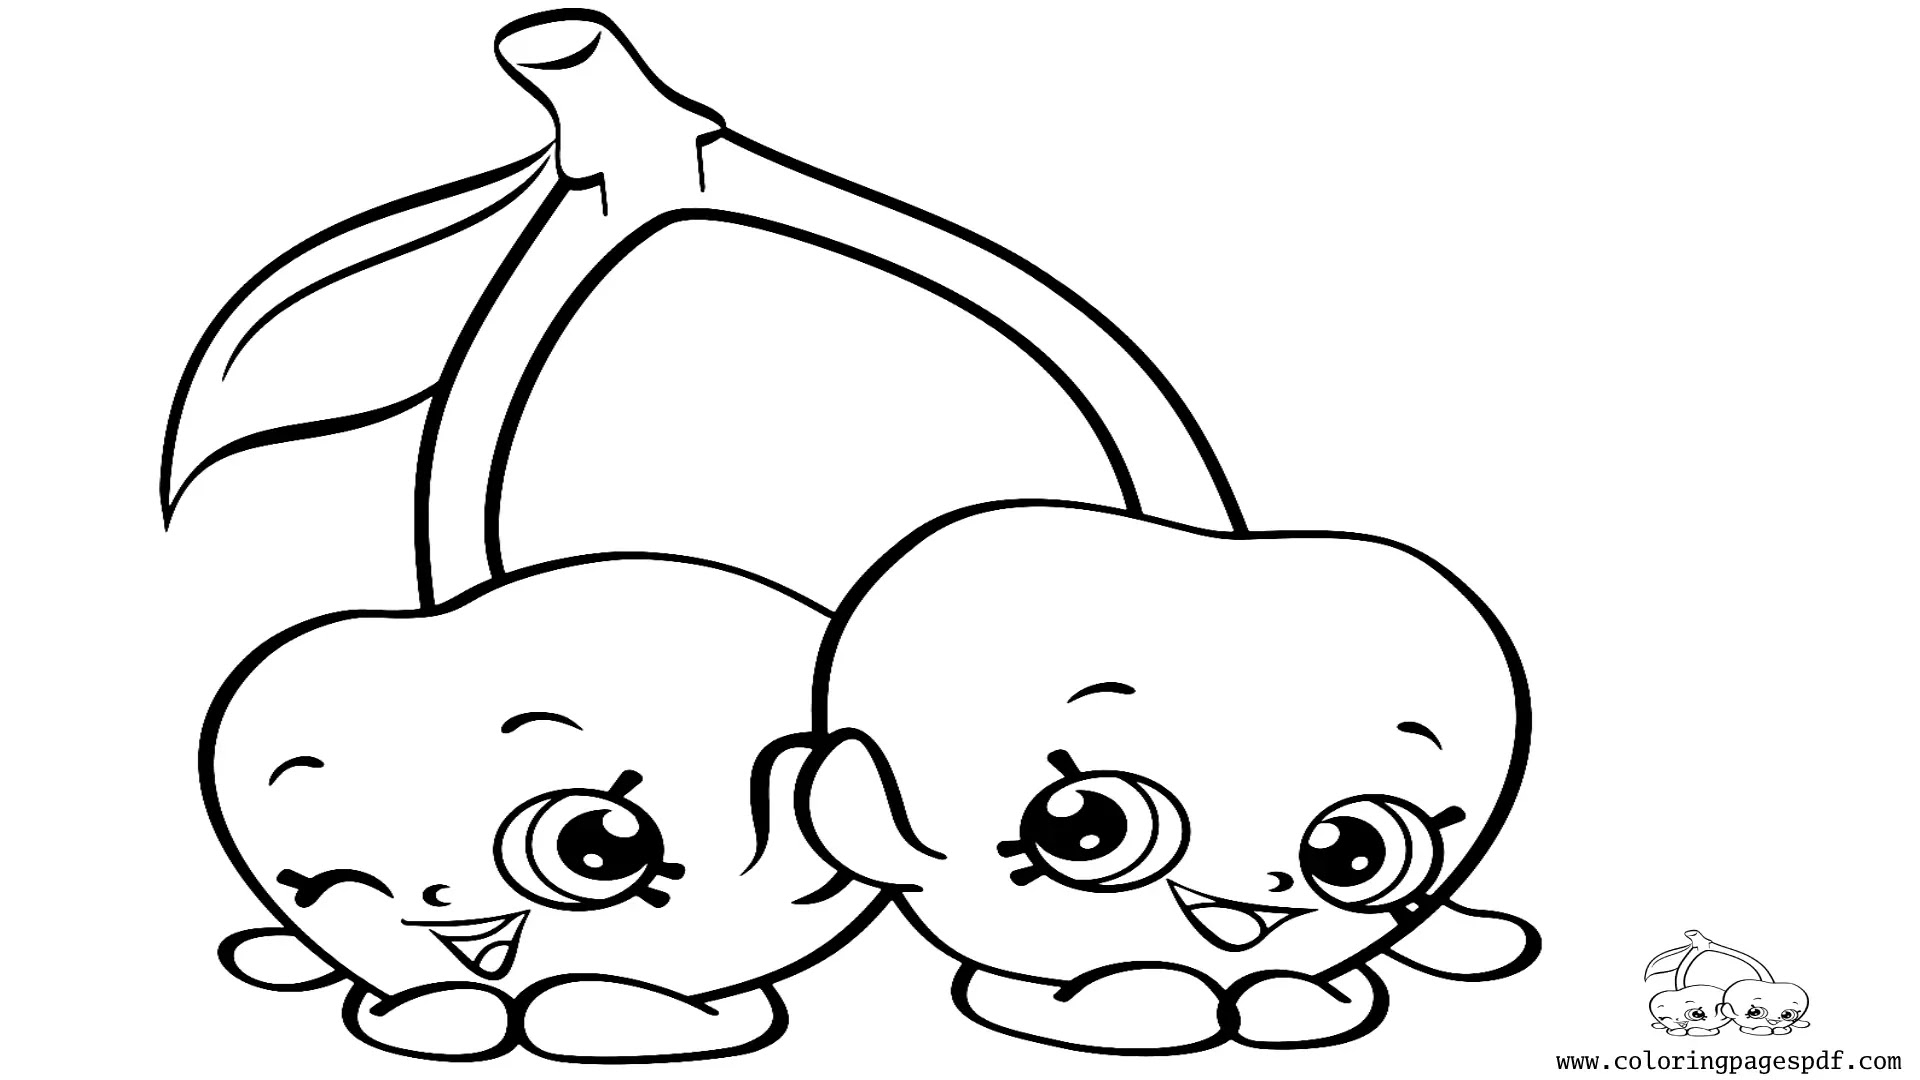 Coloring Page Of Twin Cherries